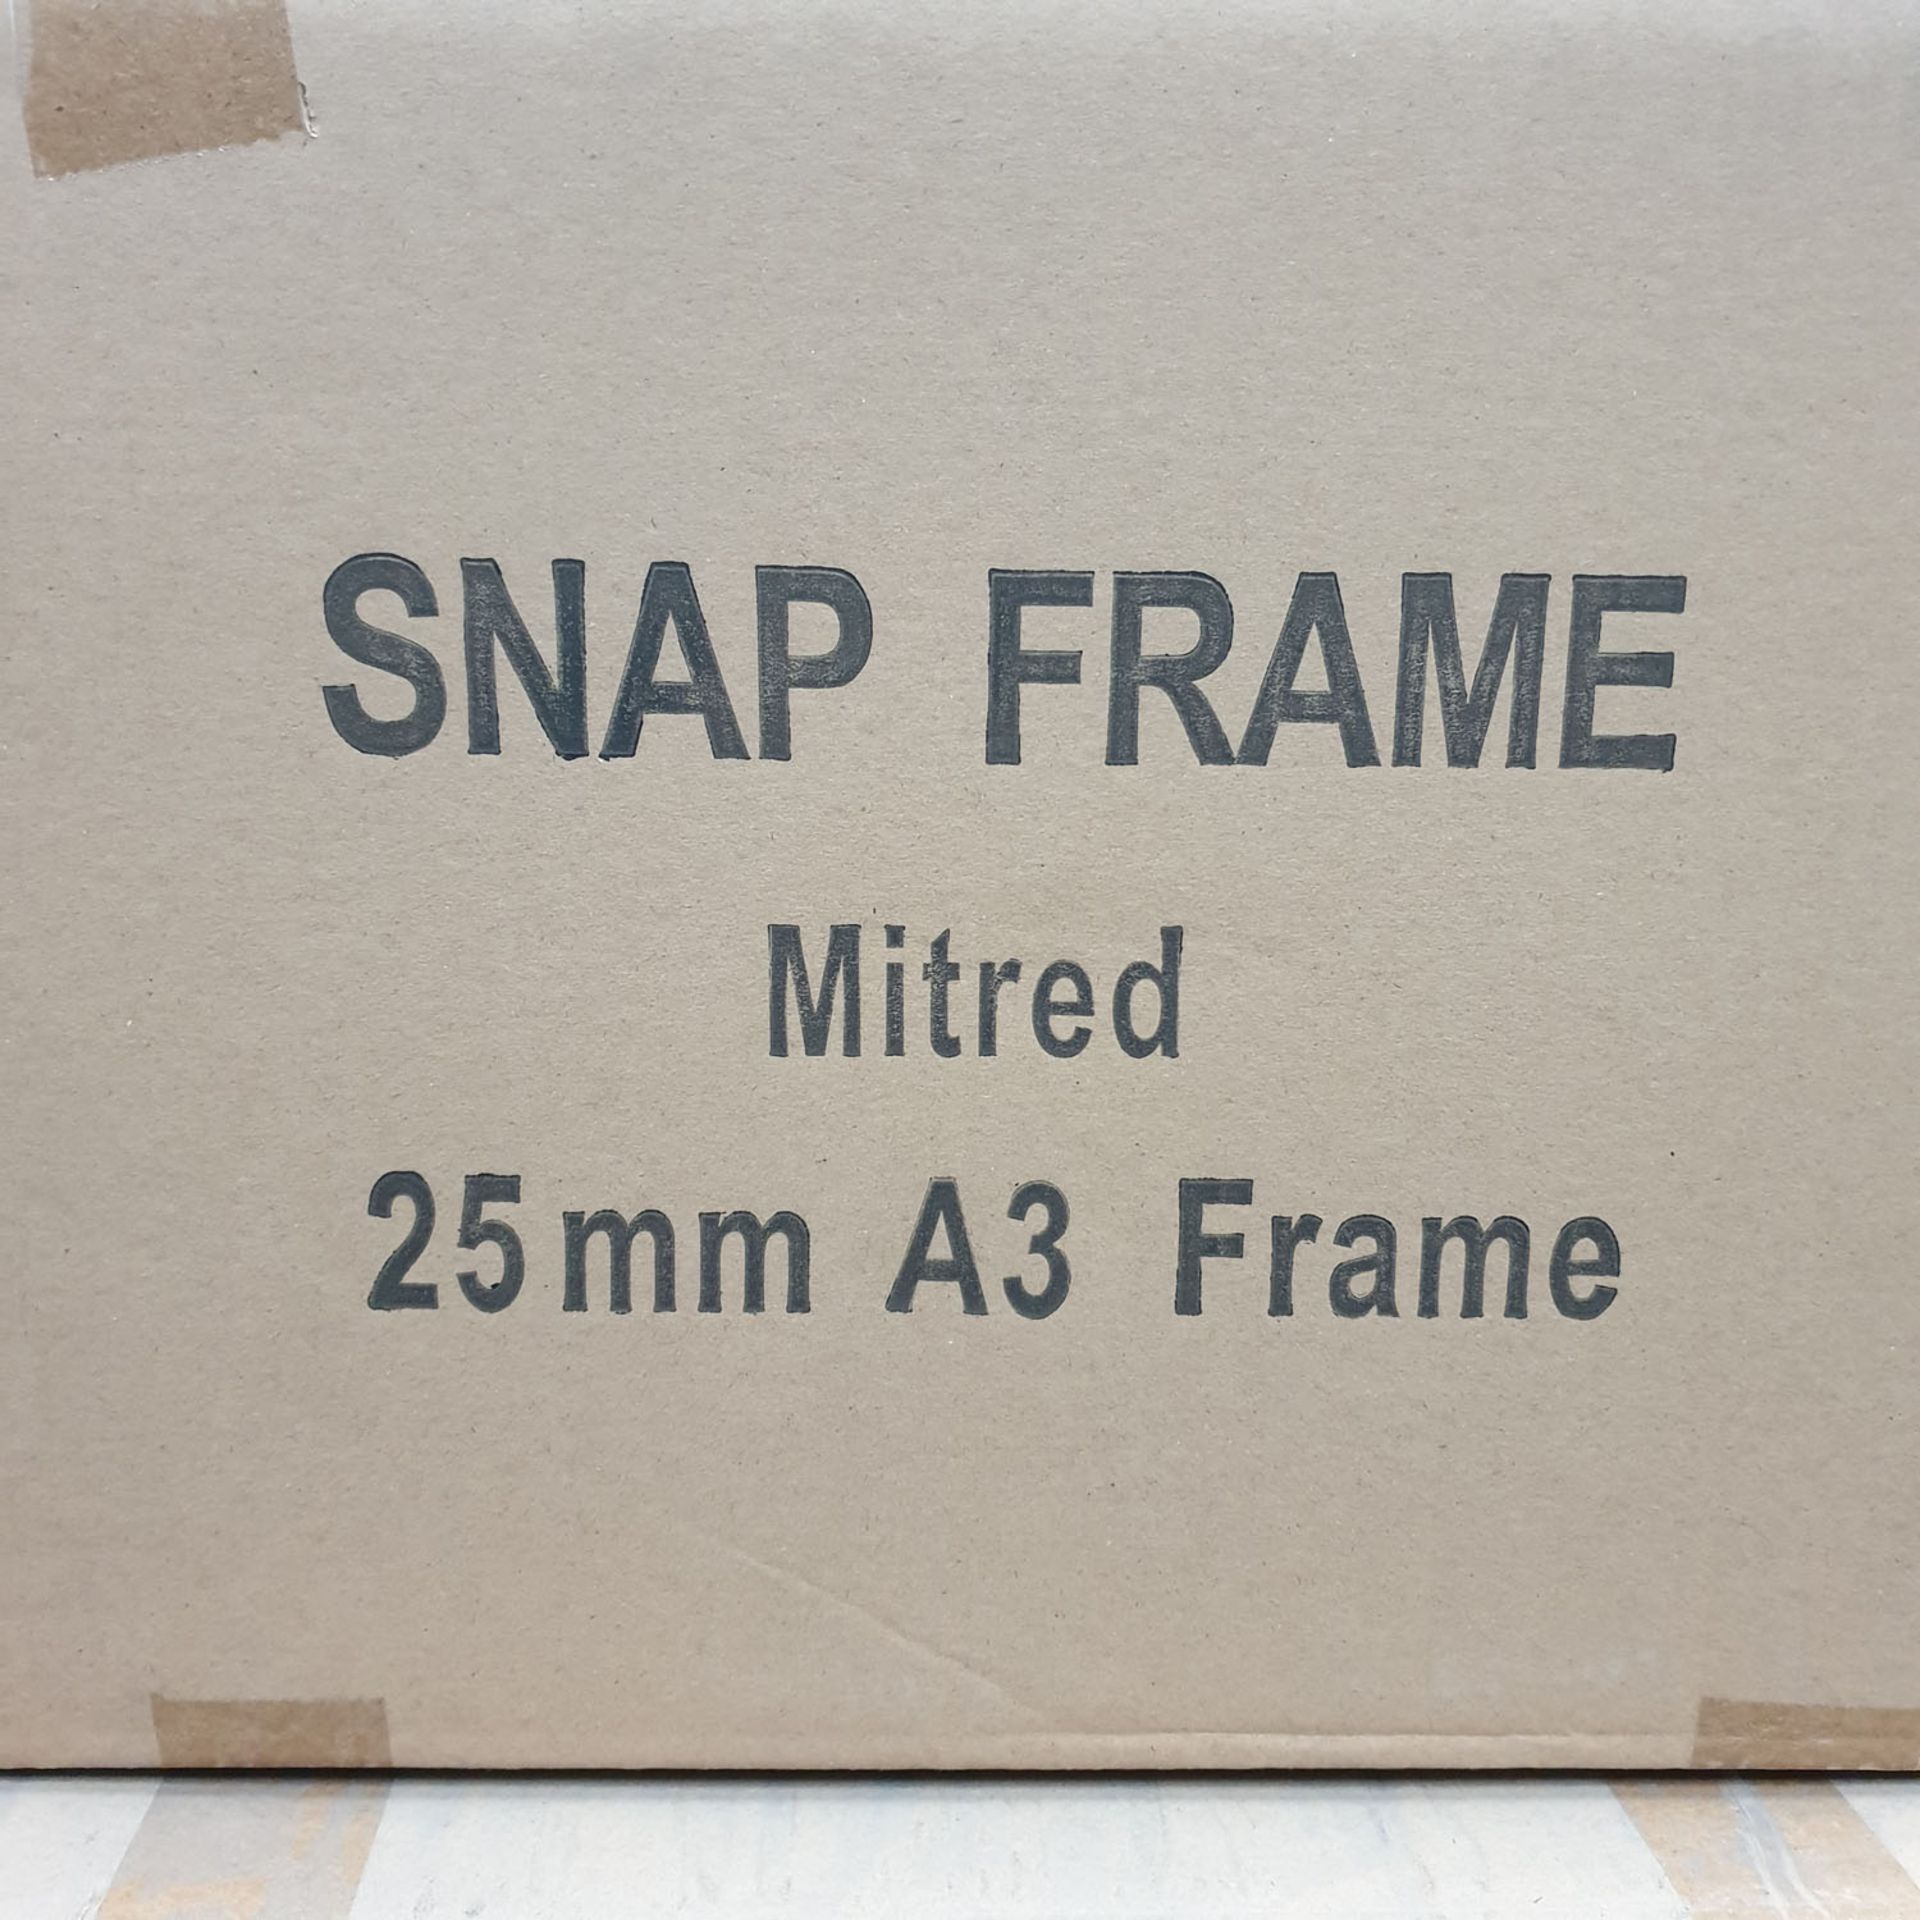 130 x Snap Frame Mitred 25mm A3 Frame - Image 4 of 5